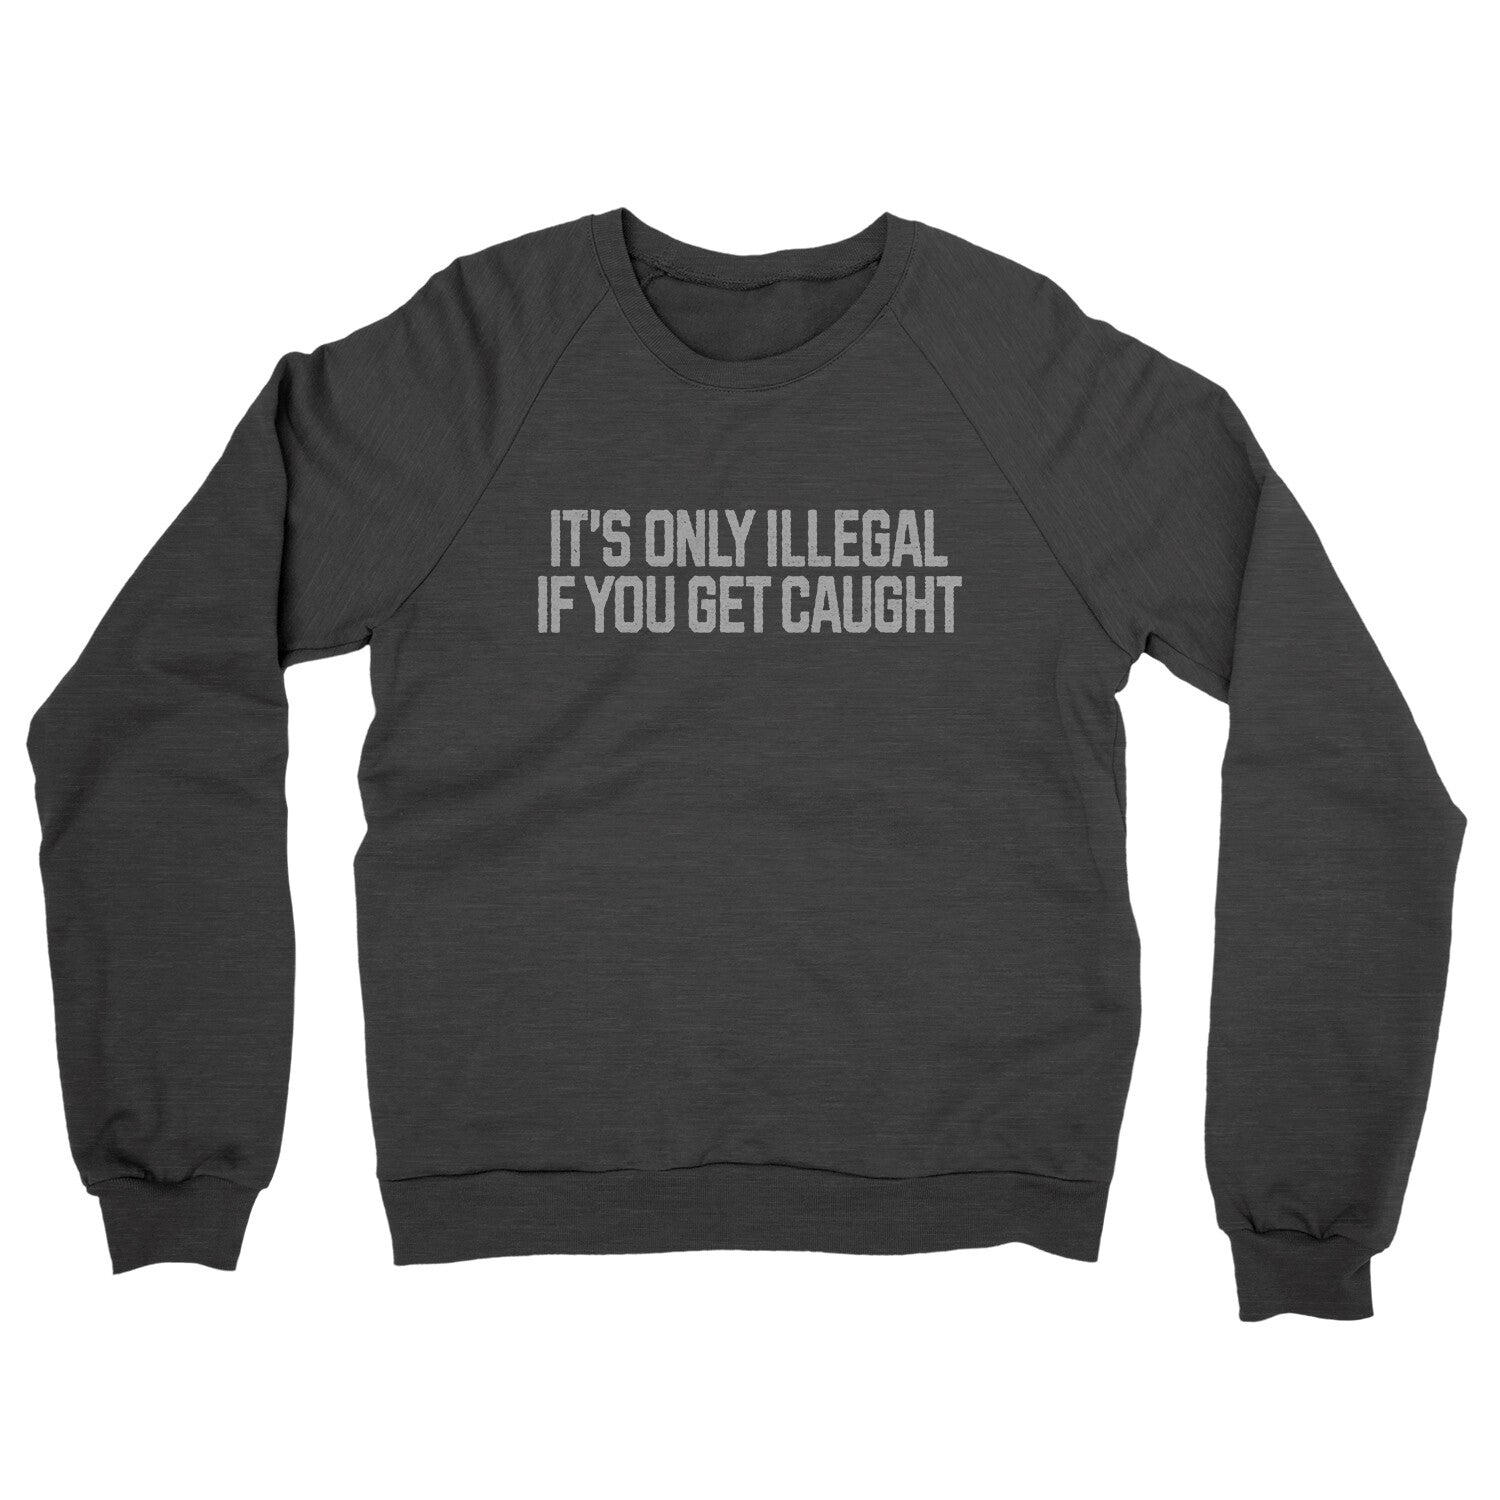 It’s Only Illegal If You Get Caught in Charcoal Heather Color